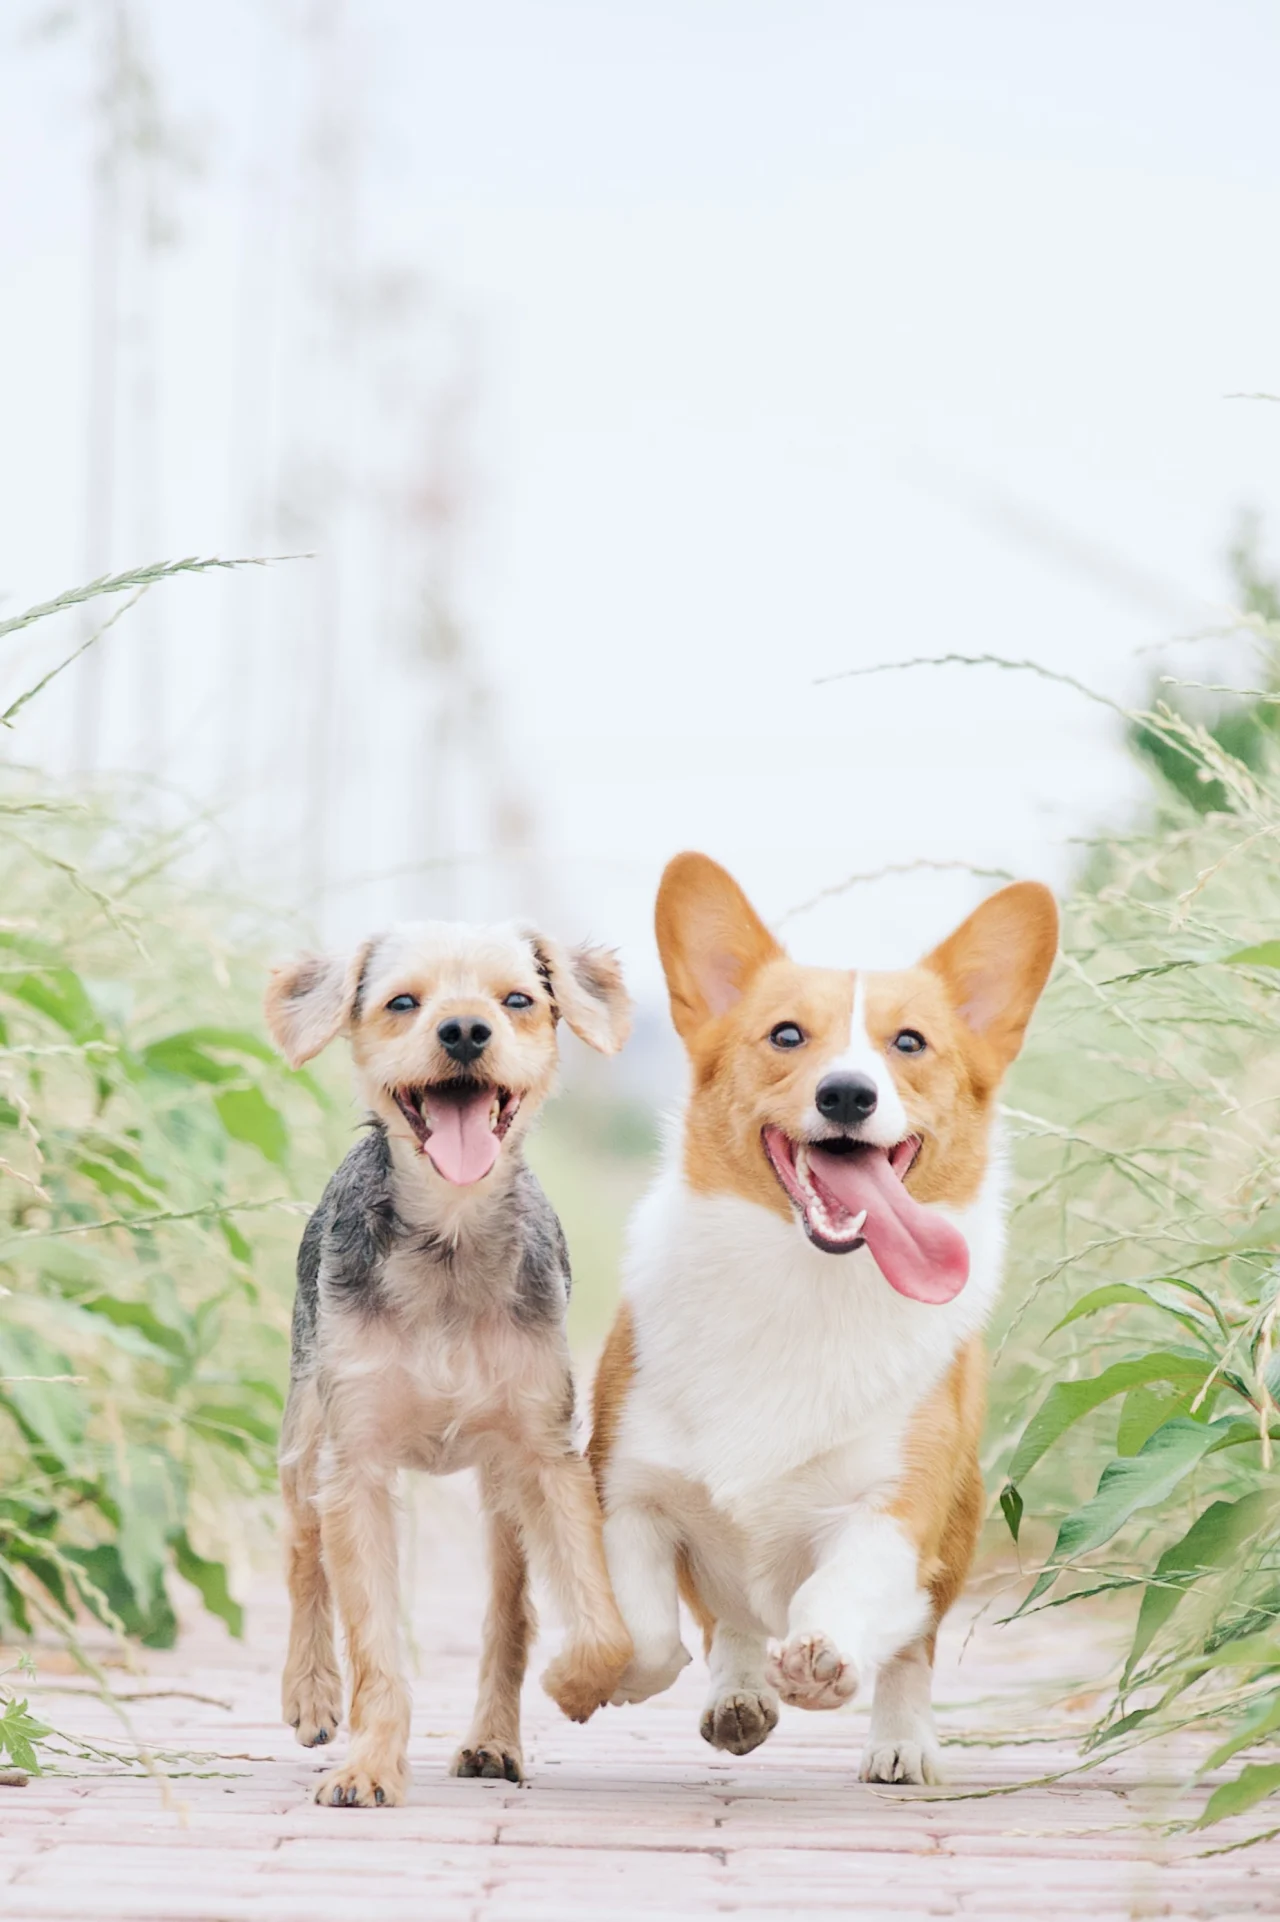 iamge for topic Dog Breeds from unsplash